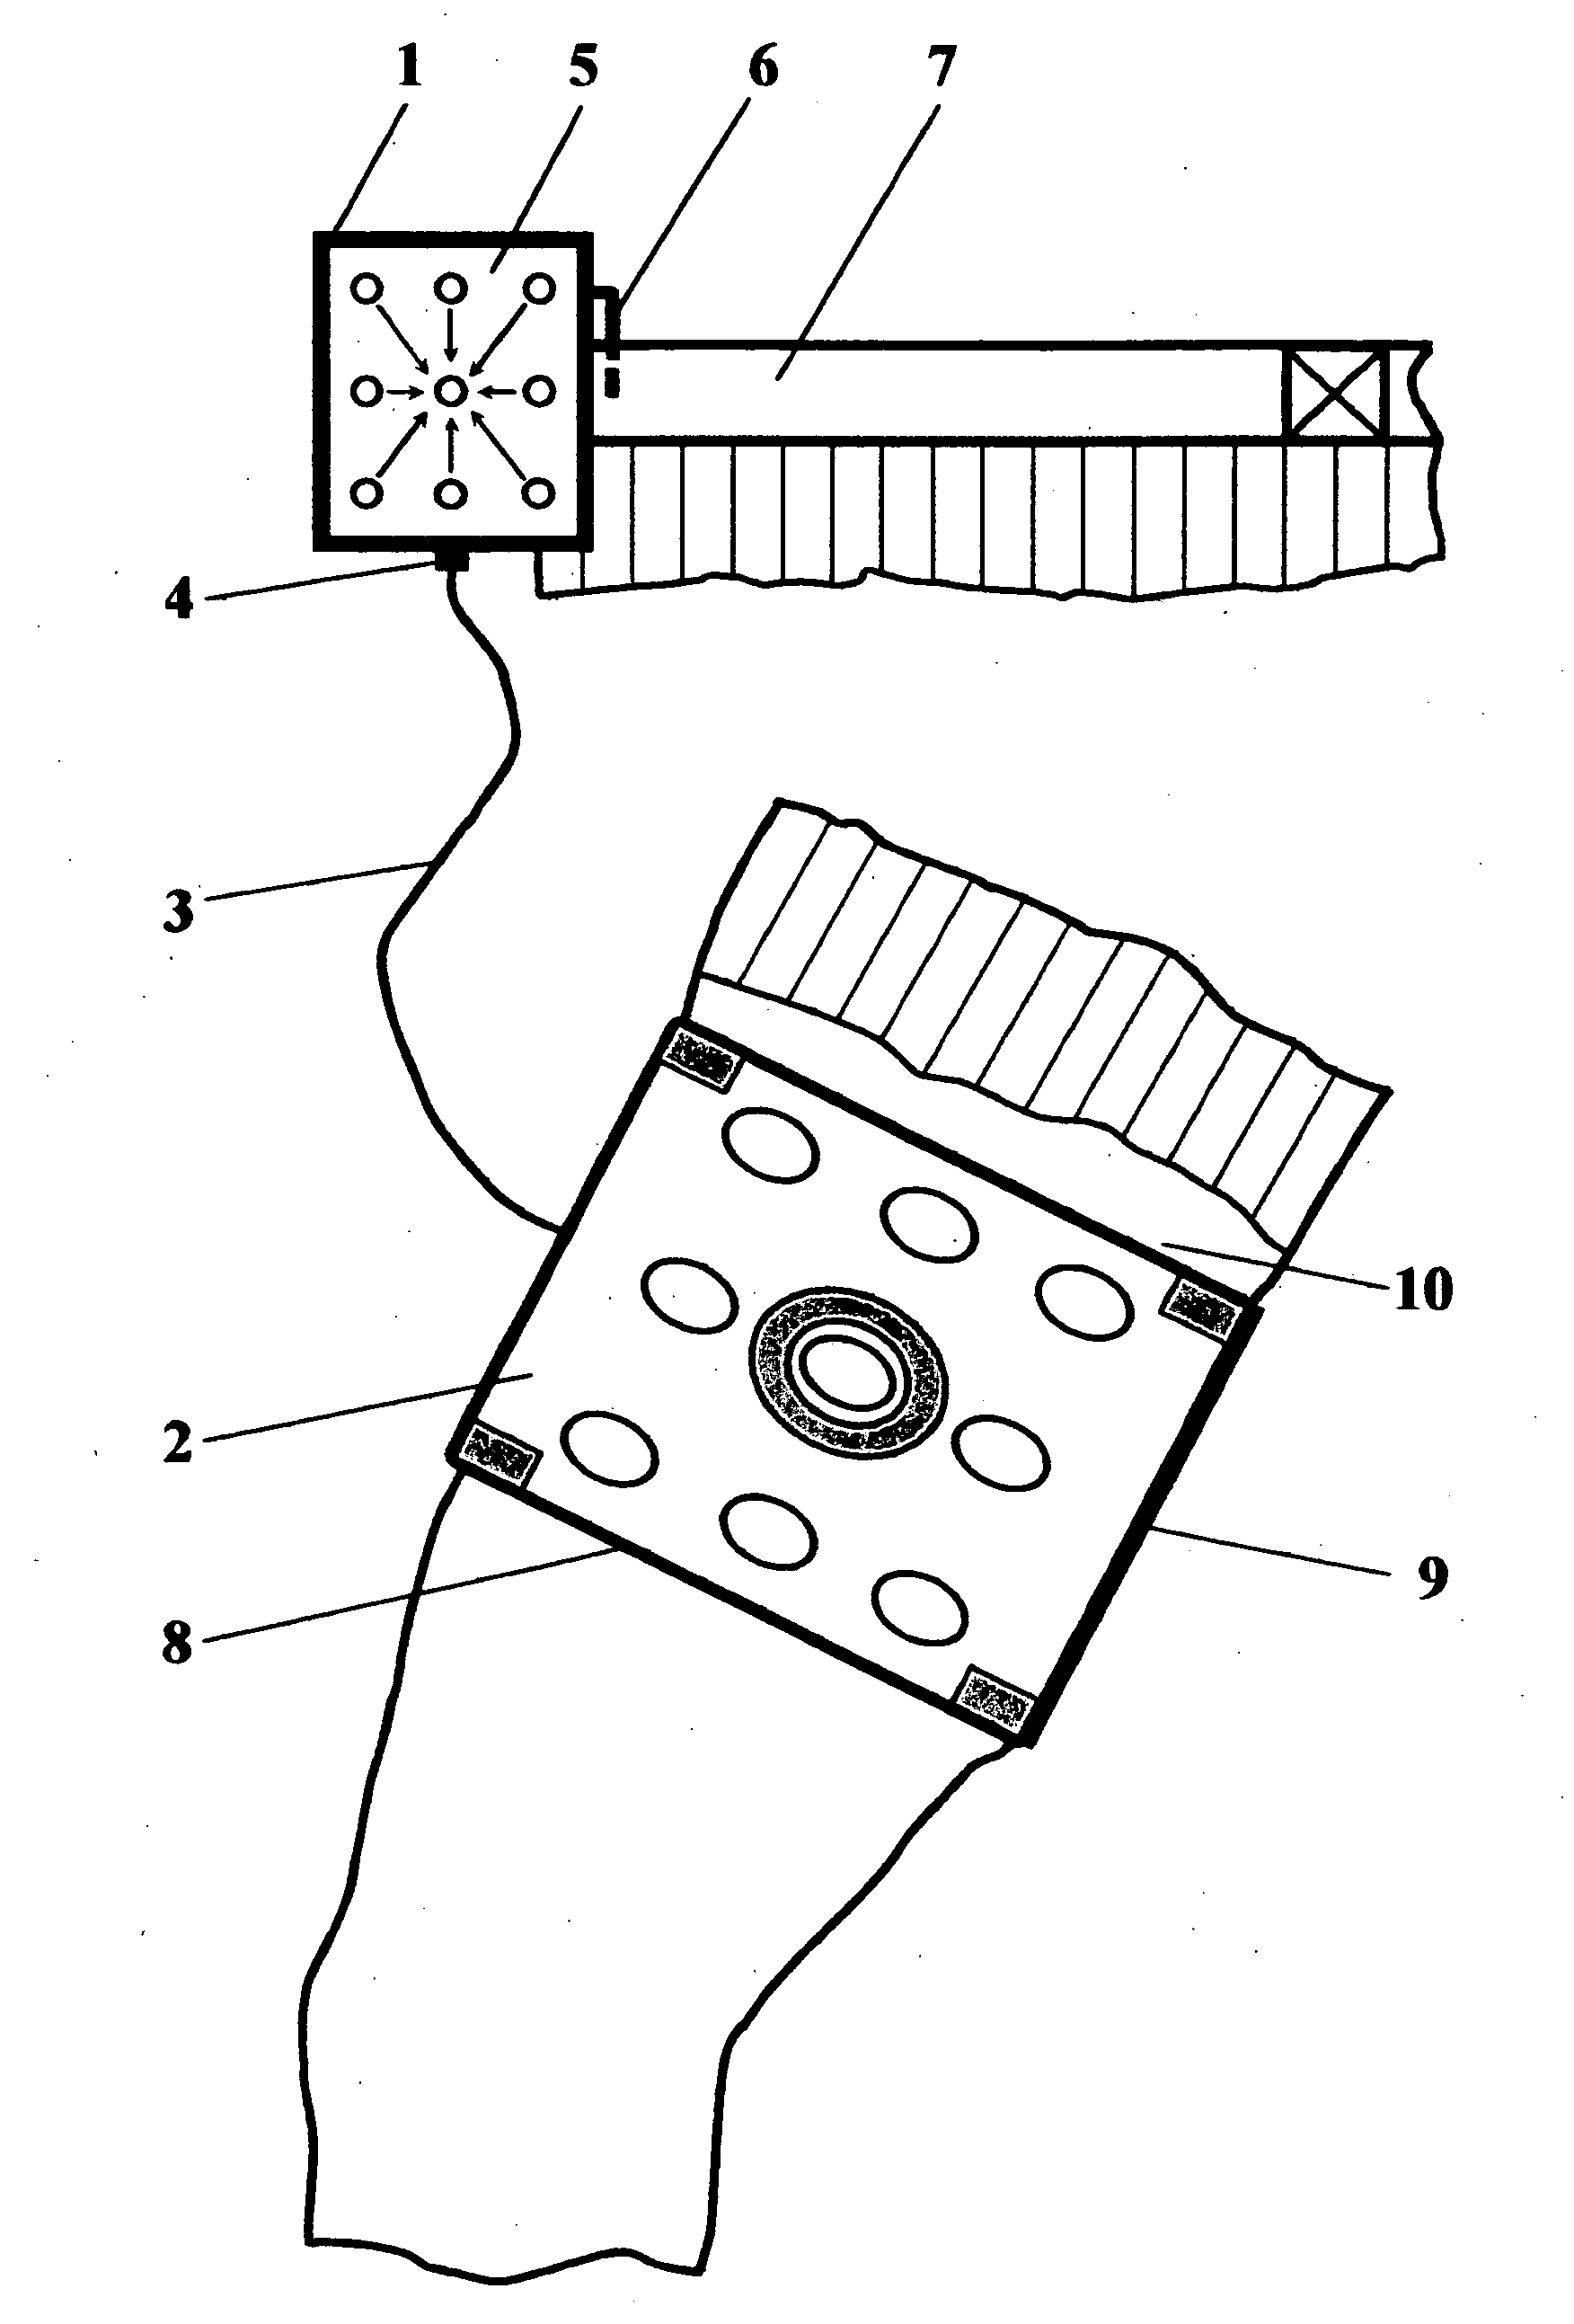 Method of dynamic binary temperature therapy